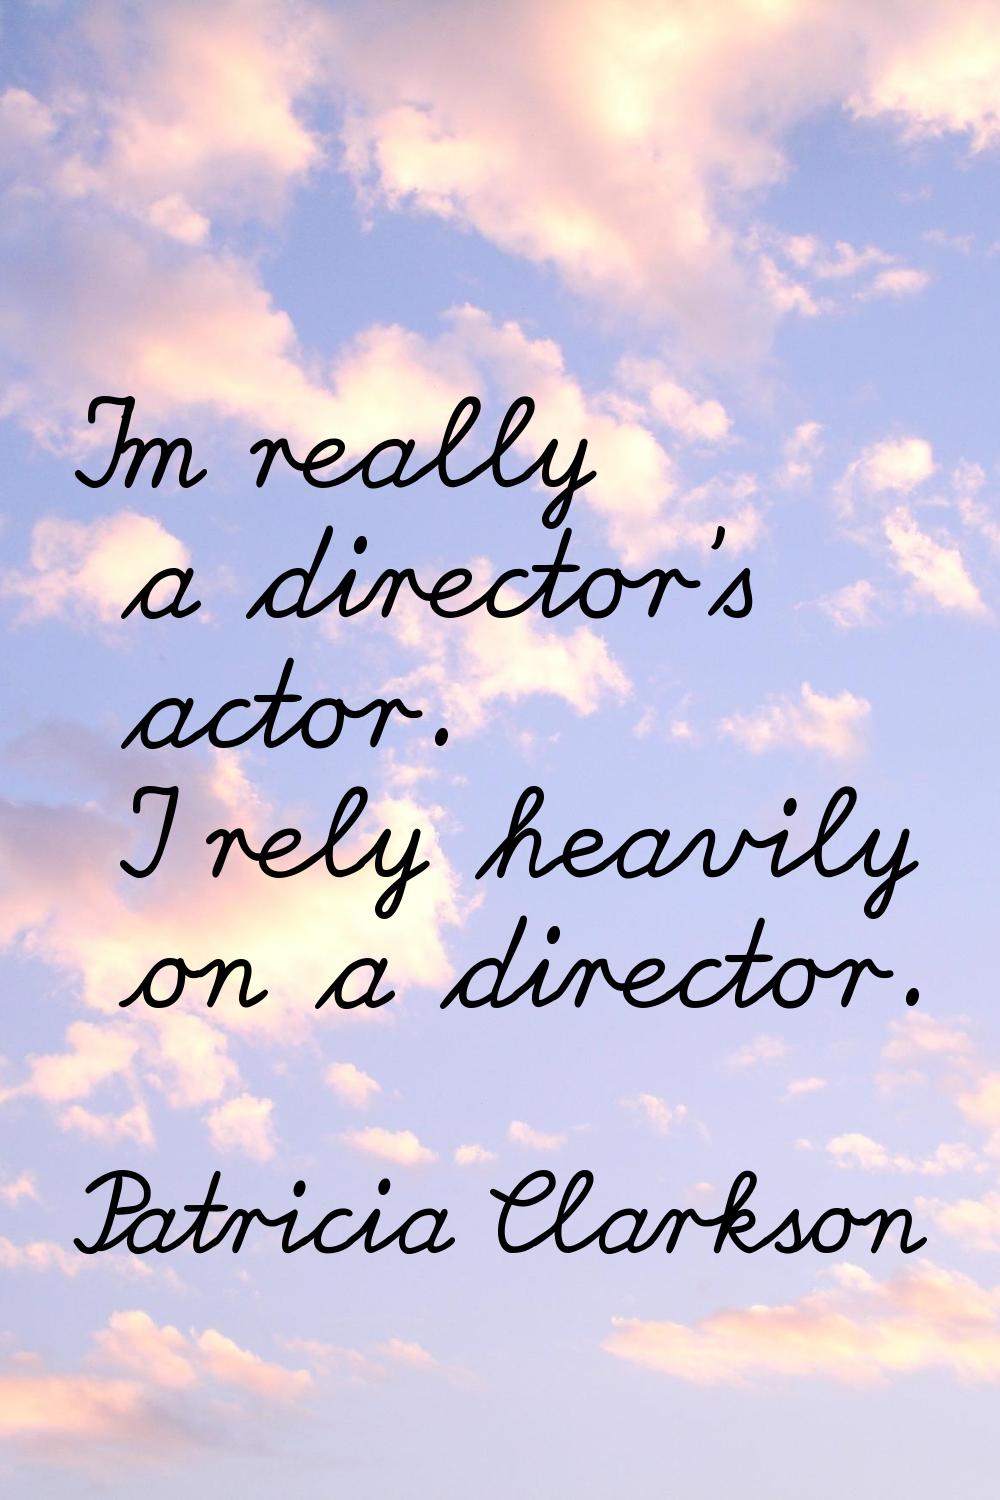 I'm really a director's actor. I rely heavily on a director.